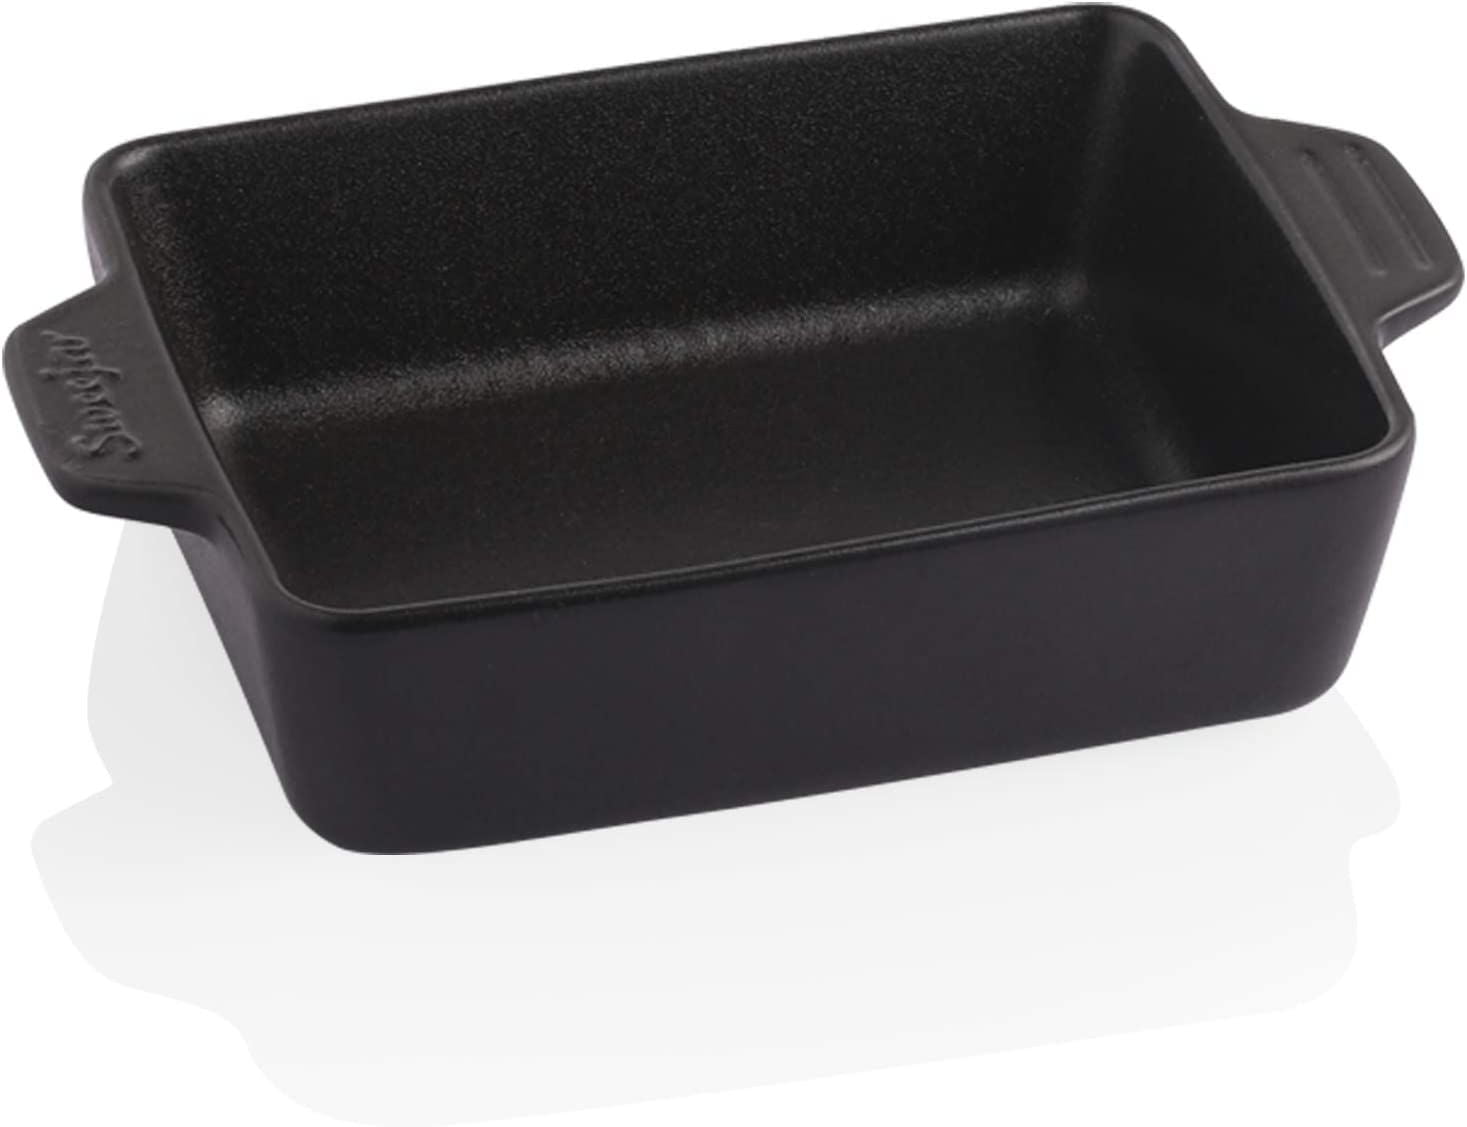 Sweejar Ceramic Baking Dish, 9 x 9 Cake Baking Pan for Brownie, Porcelain  Square Bakeware with Double Handle for Casserole, Lasagna, Family Dinner